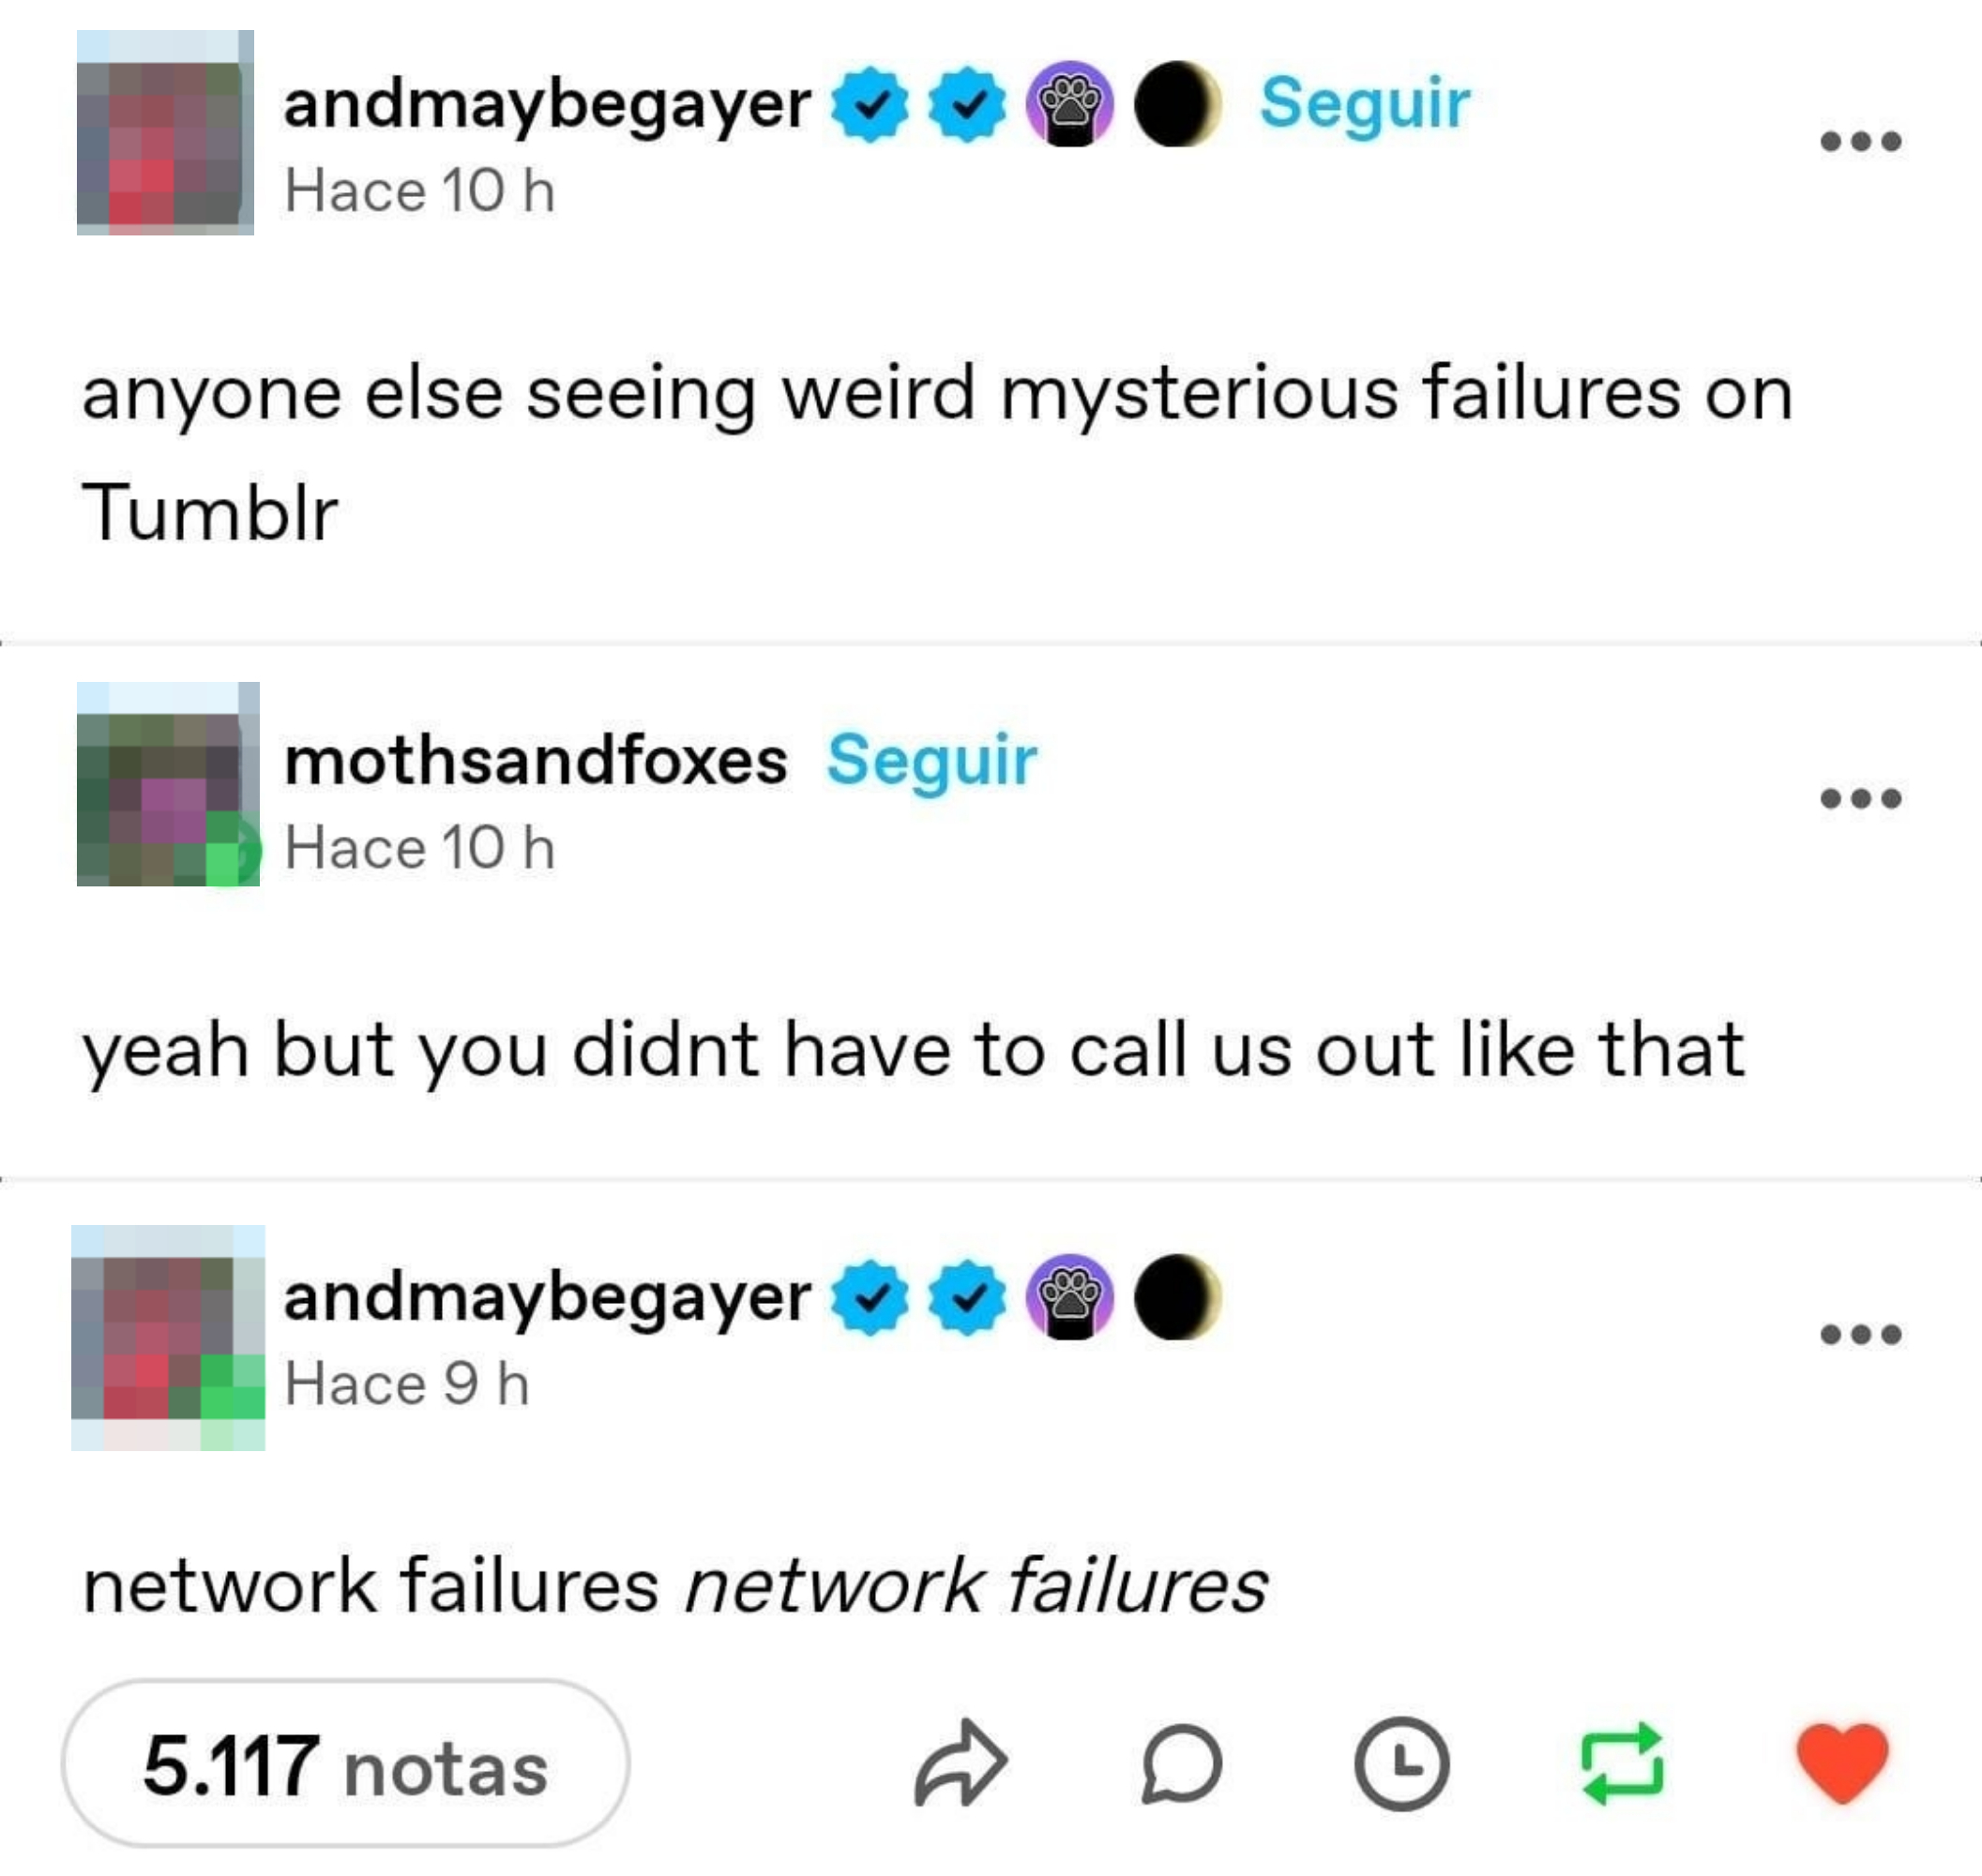 A humorous social media exchange with users andmaybeagayer and mothsandfoxes joking about network failures